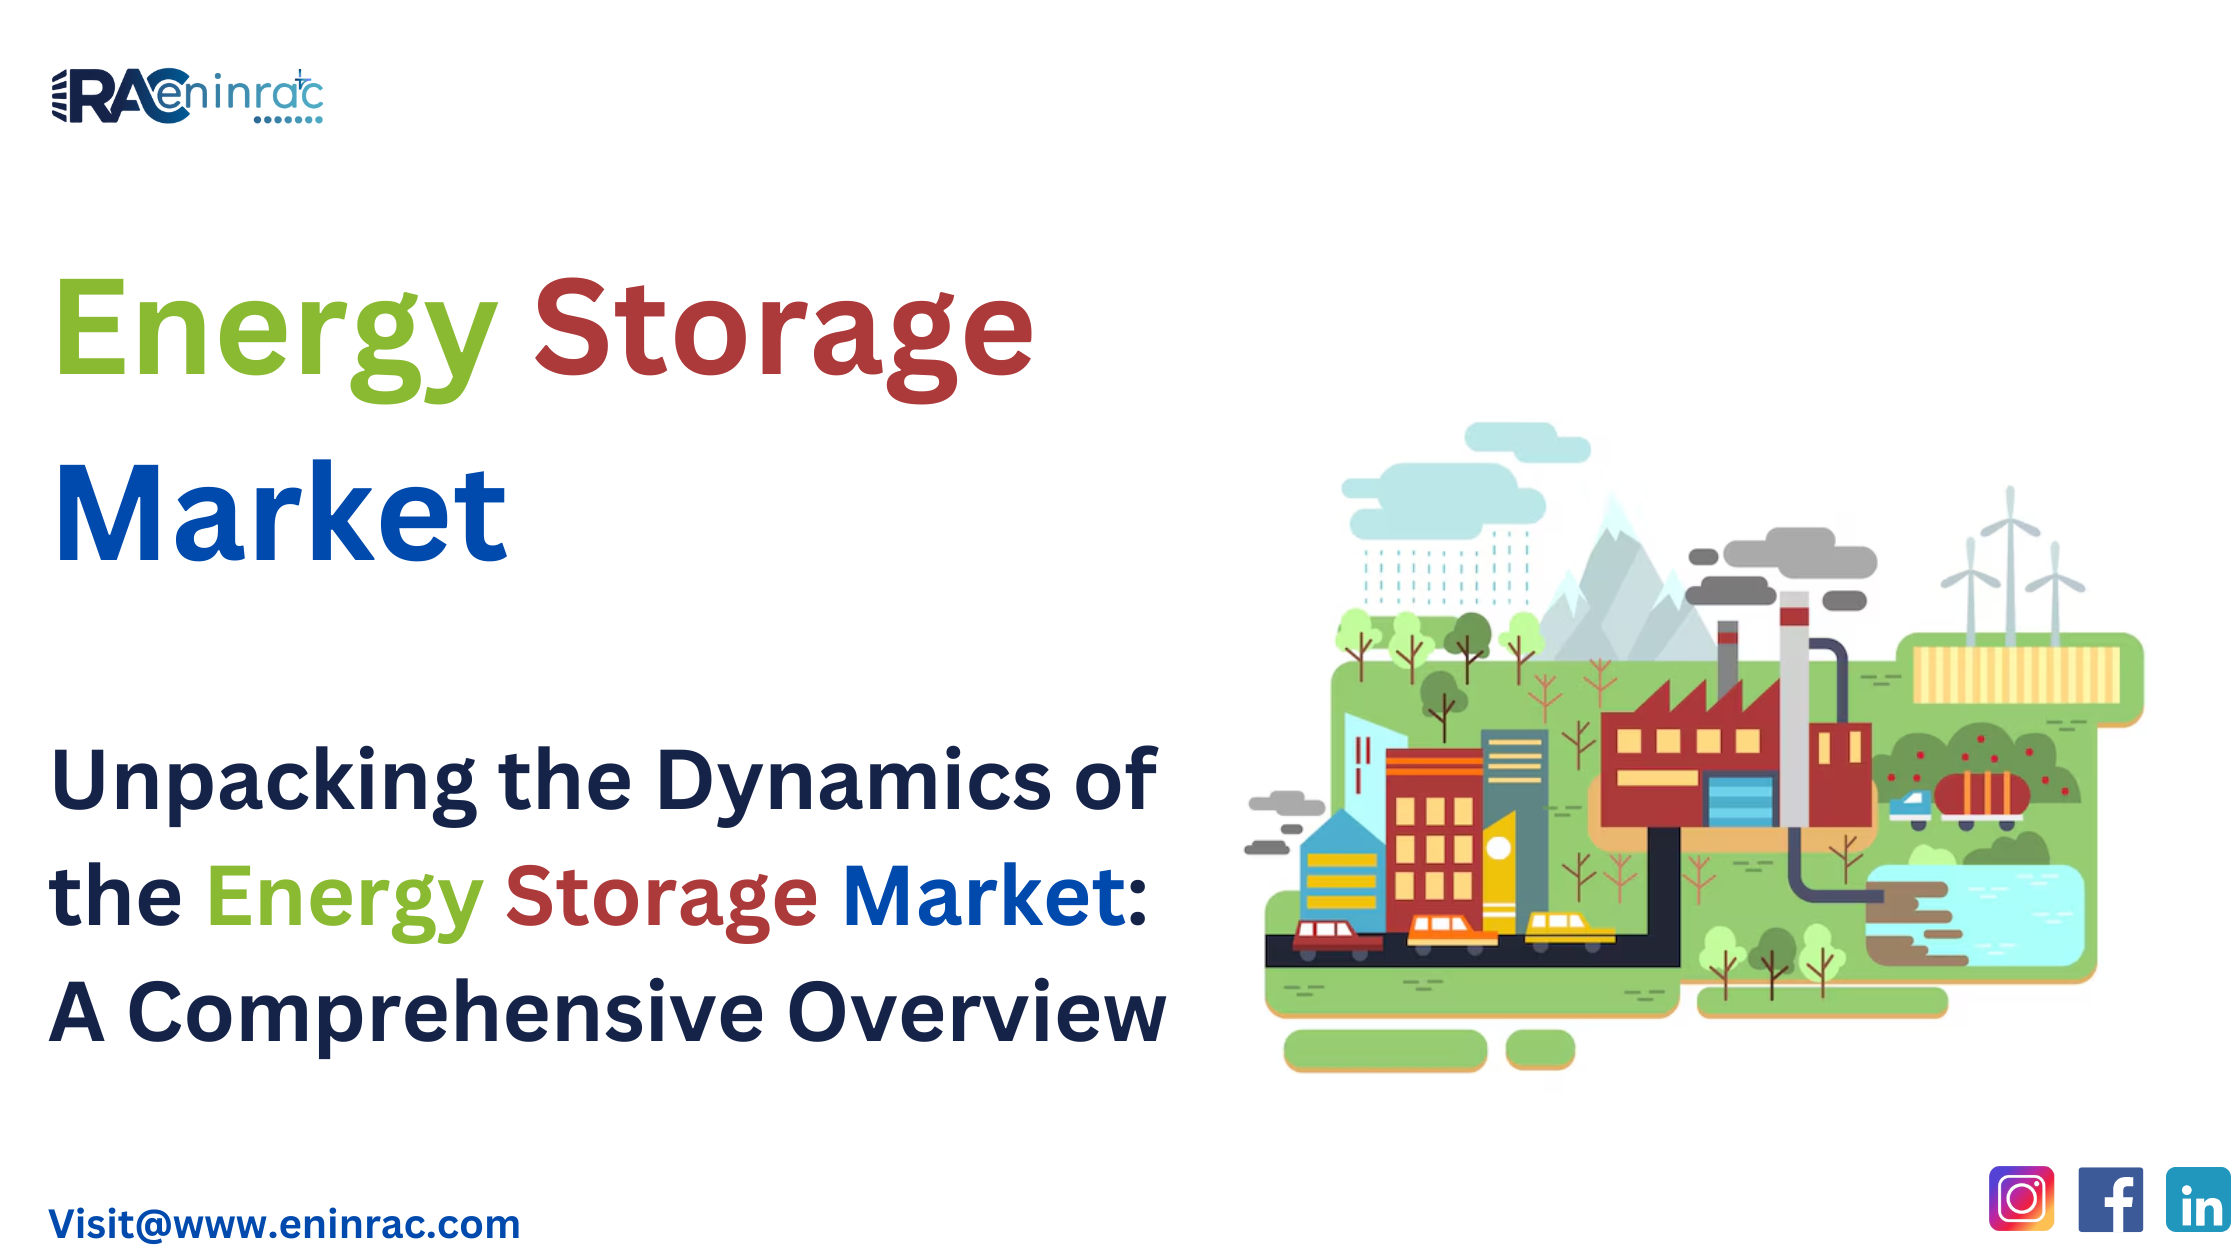 Unpacking the Dynamics of the Energy Storage Market: A Comprehensive Overview